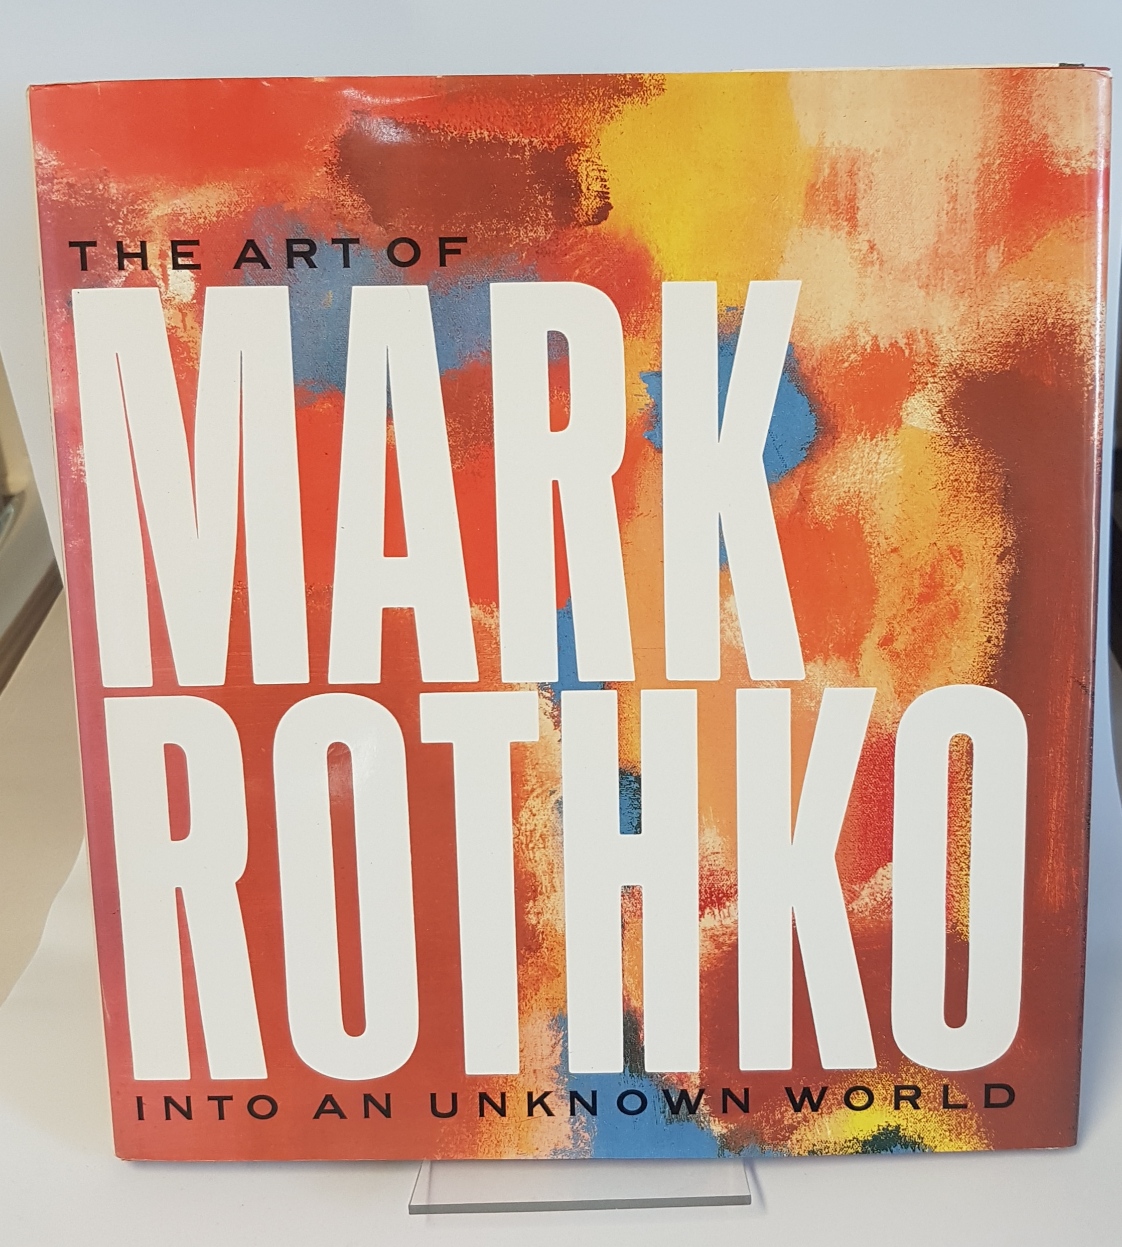 The Art of Mark Rothko into an Unknown World - Rothko, Mark; Glimcher, Marc (edited)